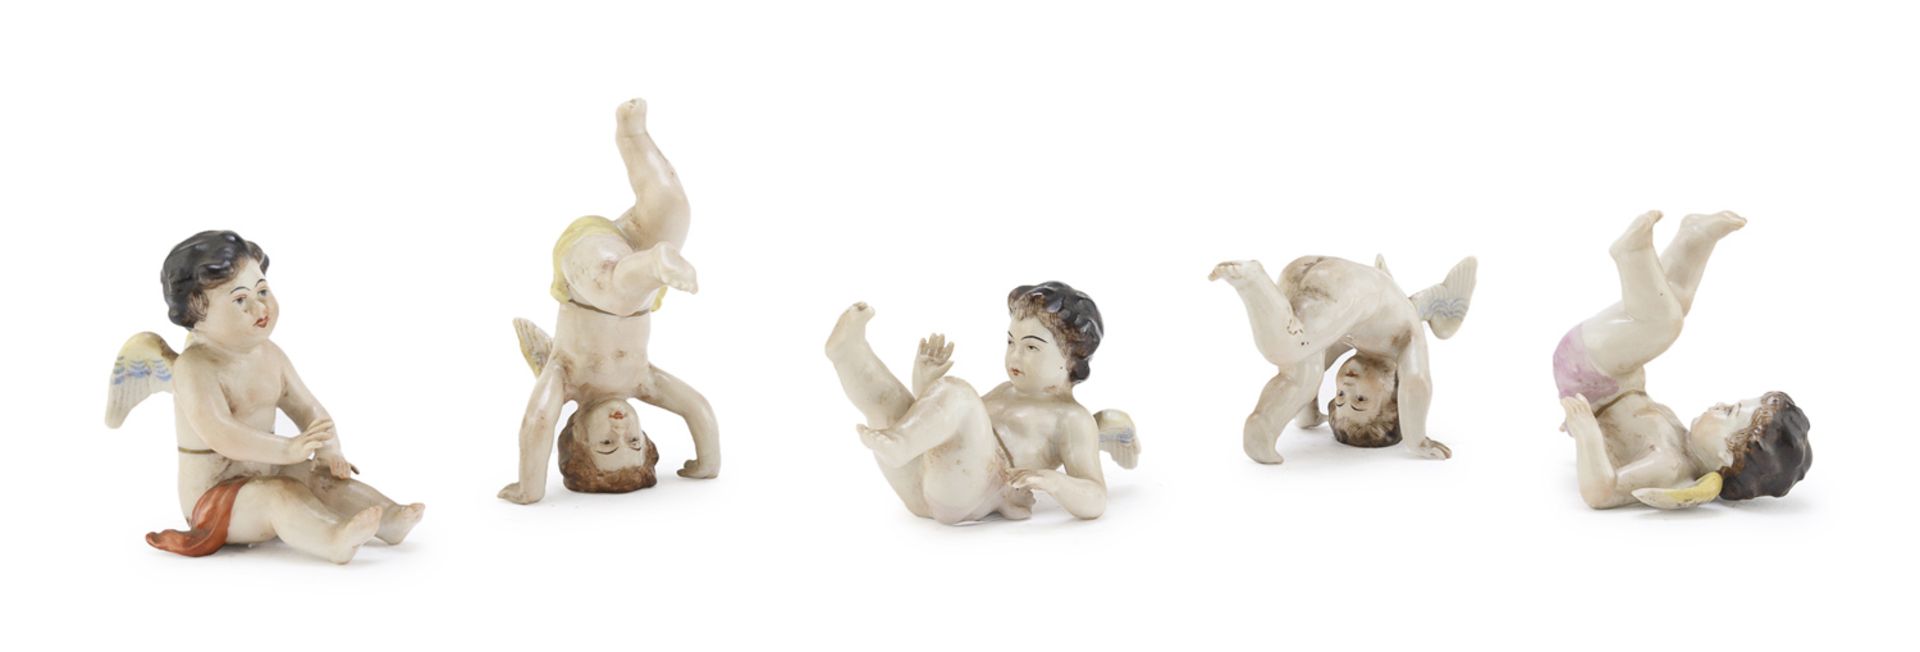 FIVE CUPID FIGURES IN PORCELAIN GINORI EARLY 20TH CENTURY